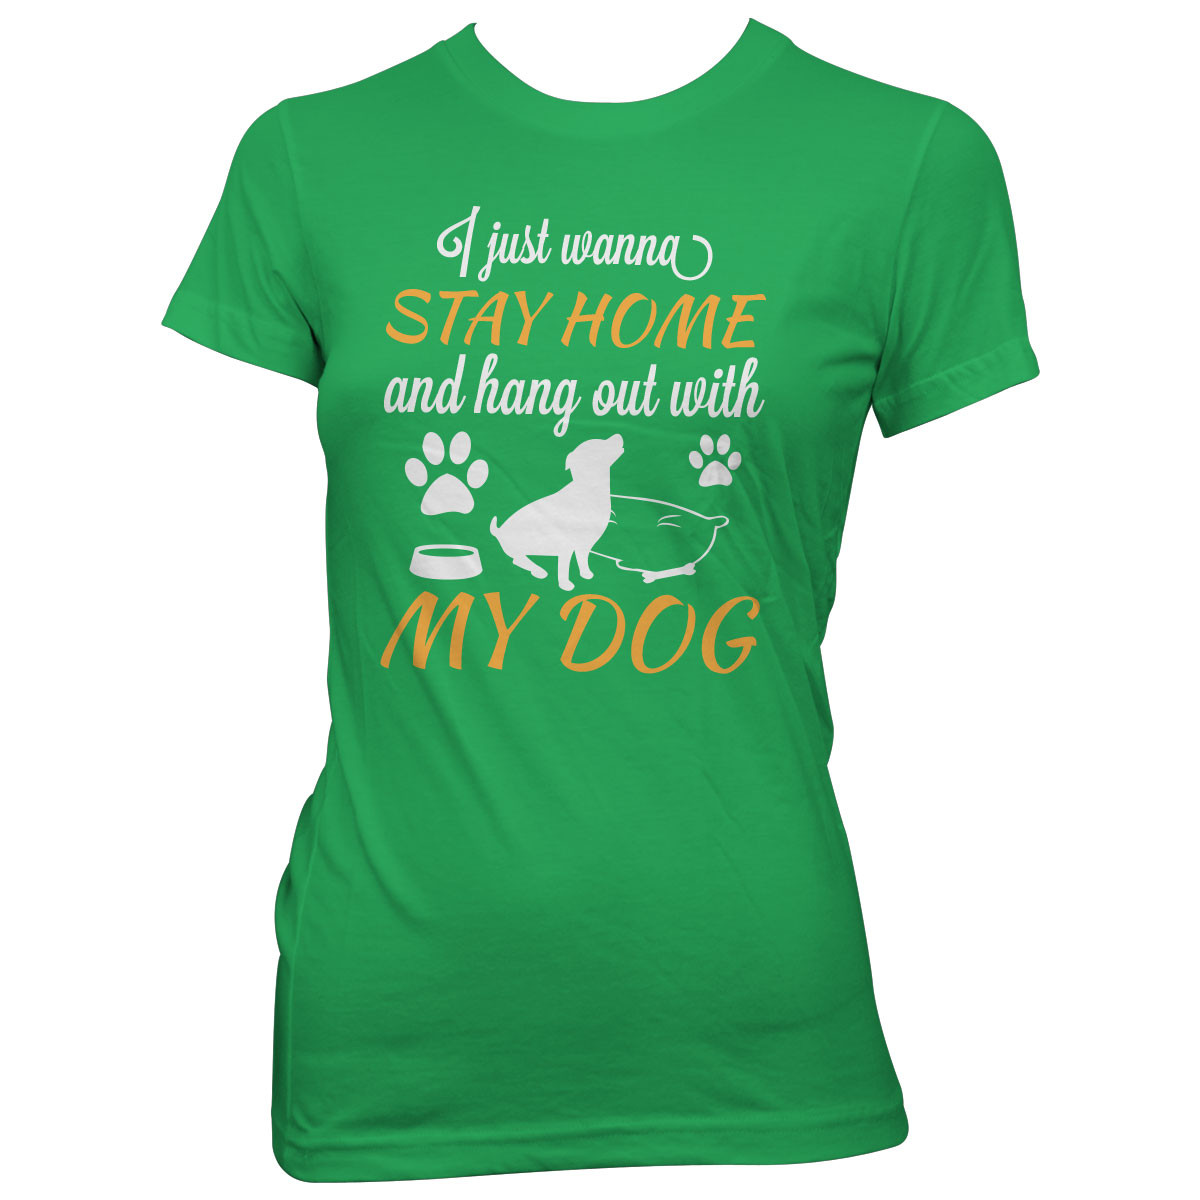 "Stay Home And Hang Out With My Dog" T-Shirt